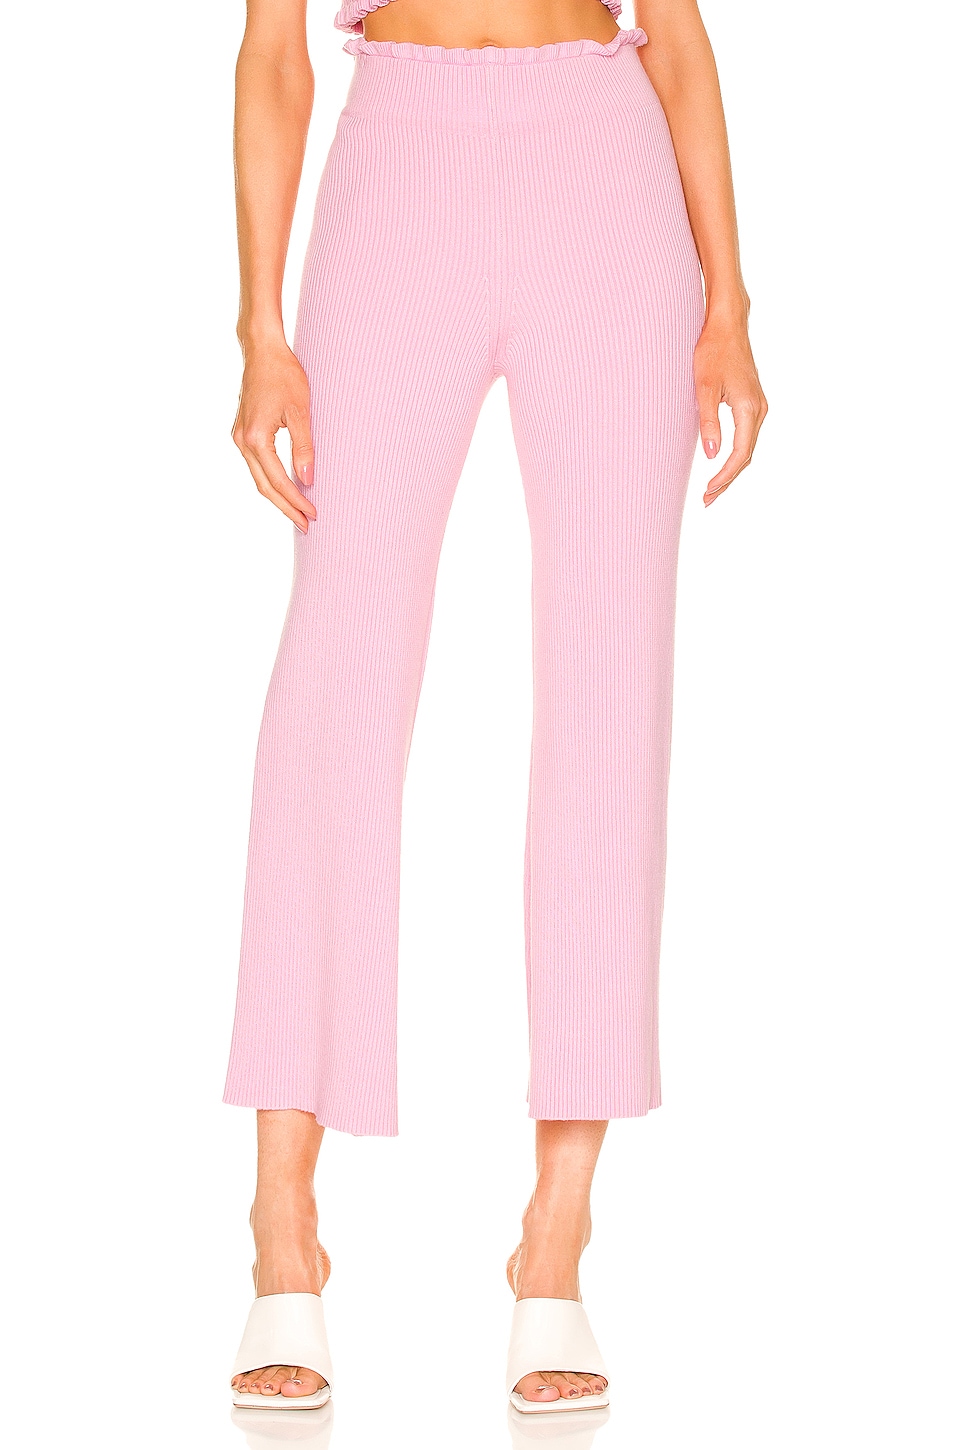 Bardot Polly Faux Leather Pant in Hot Pink